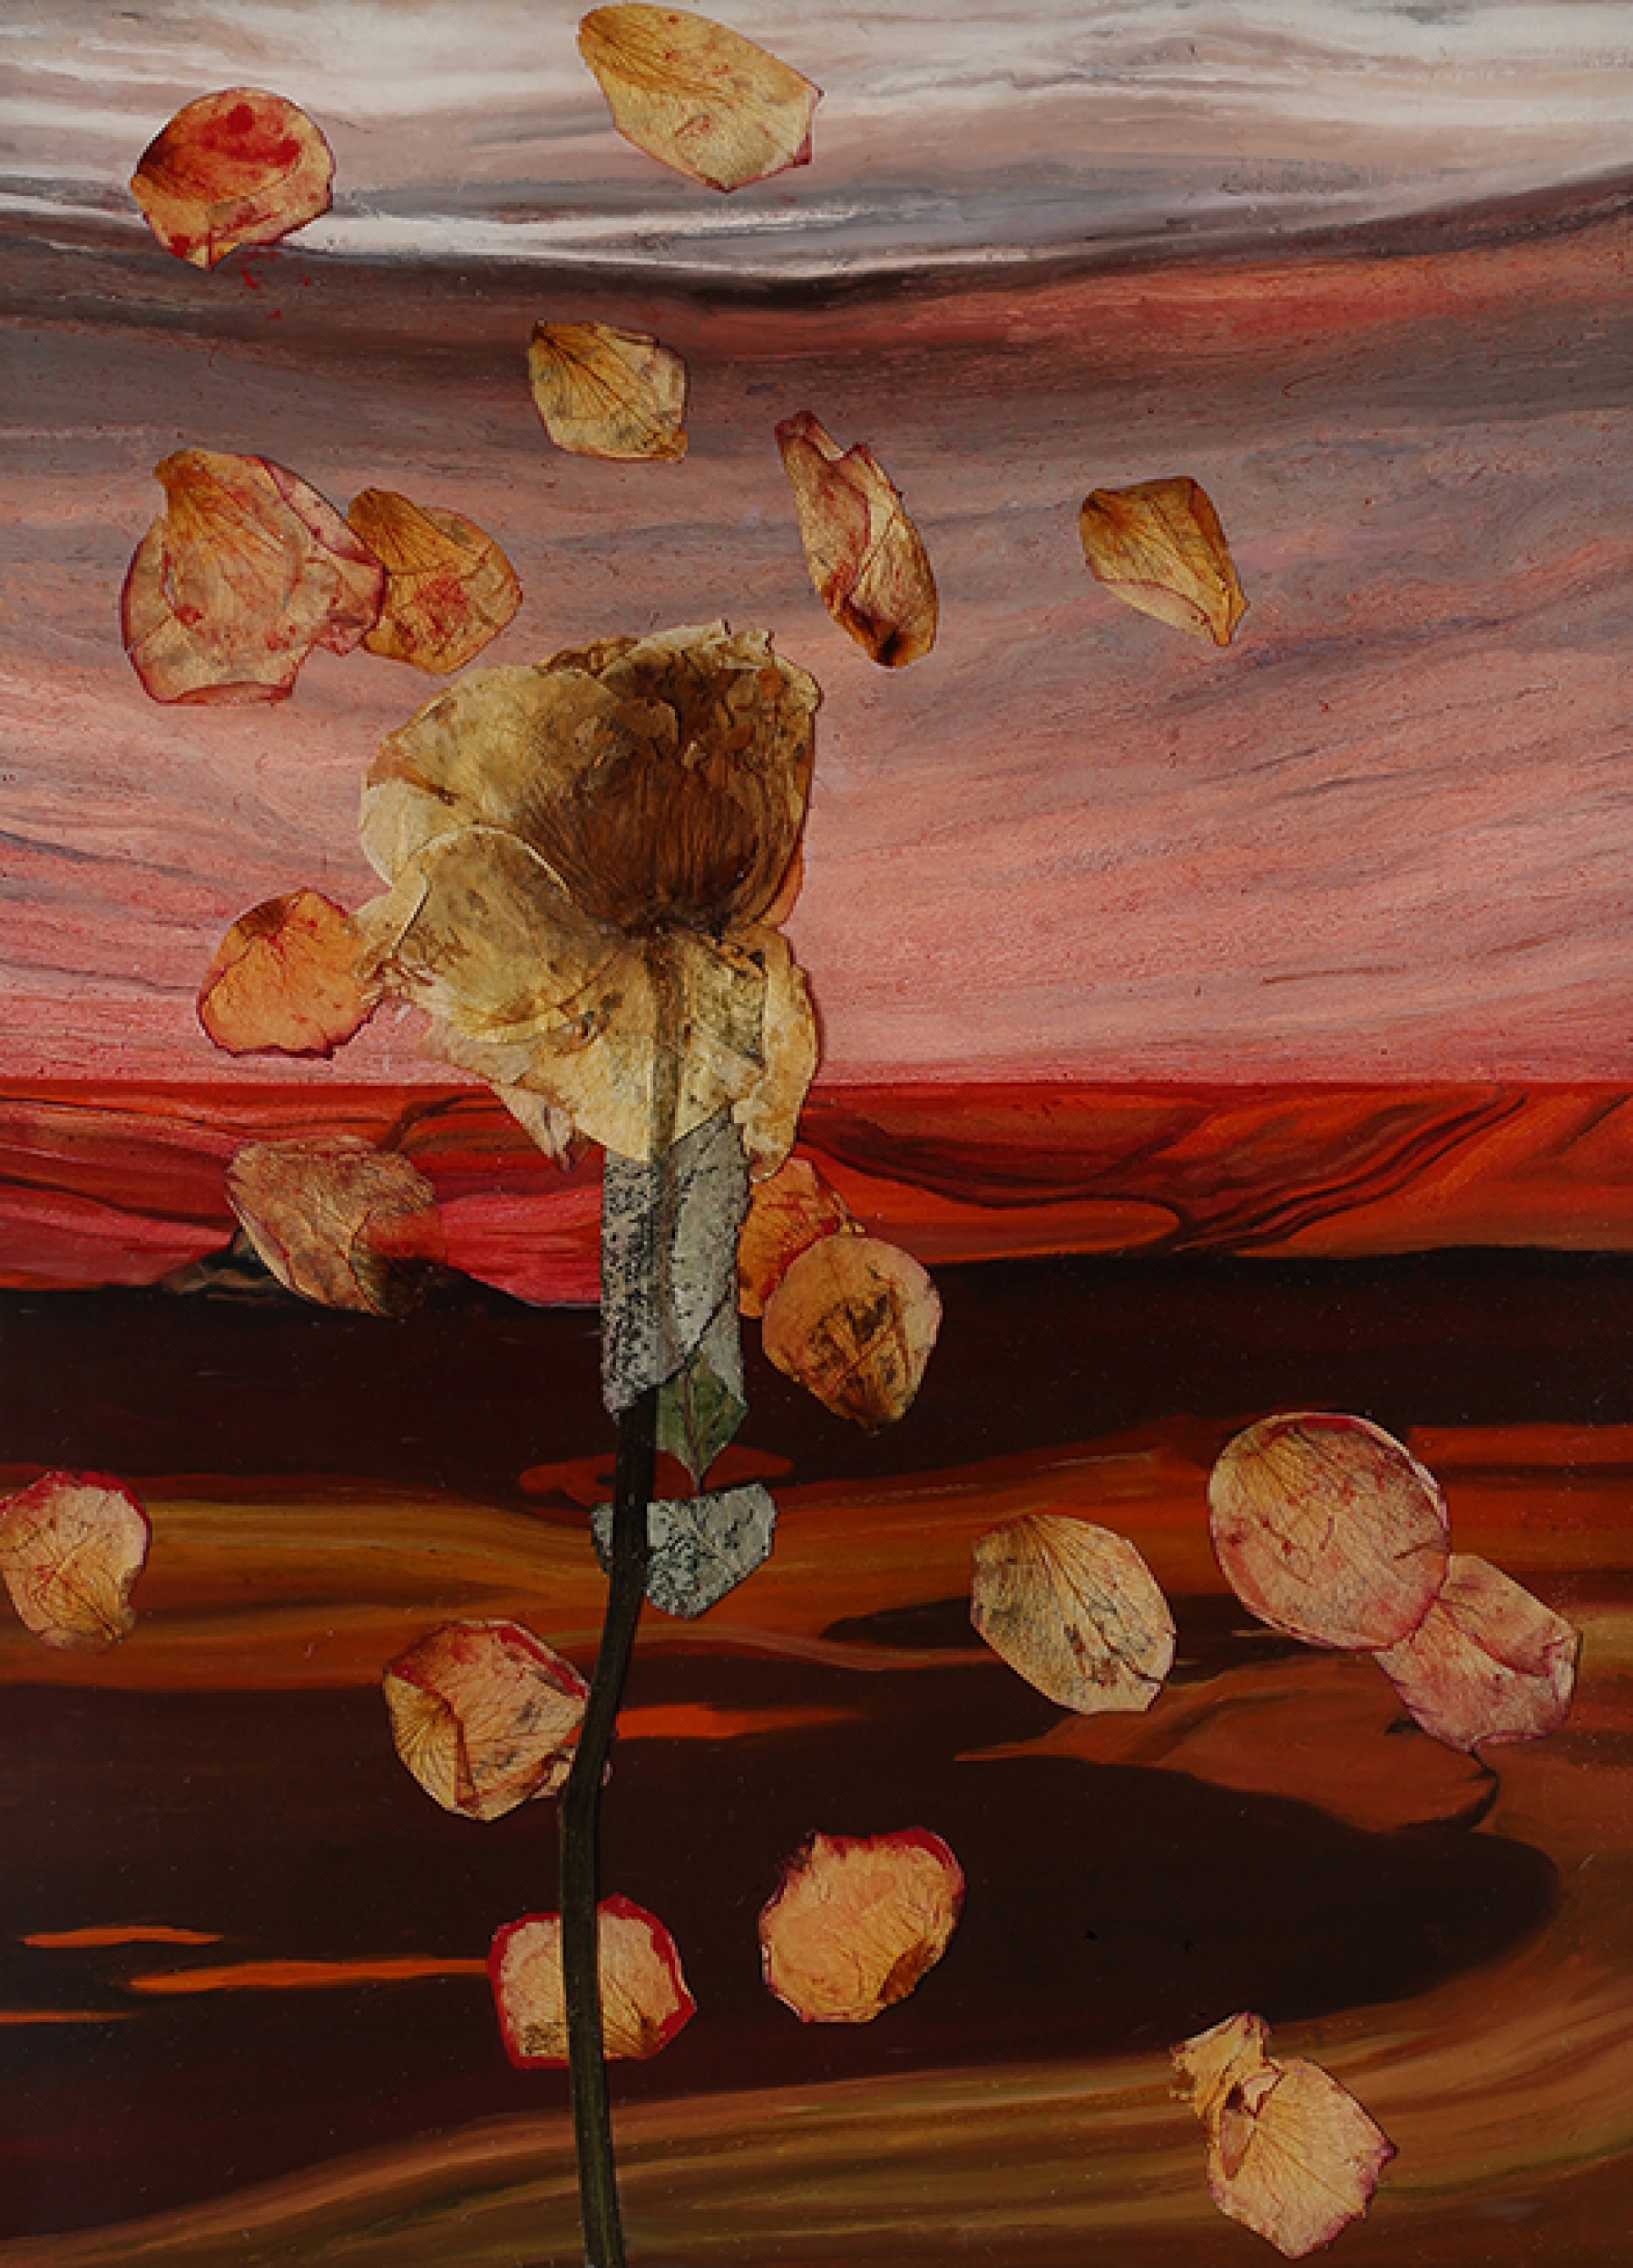 alan-salisbury-last-day-landscape-6-dead-flower-with-dead-floating-petals.-2020.-resin-flora-and-oil-on-board.-26-x-20cm.-first